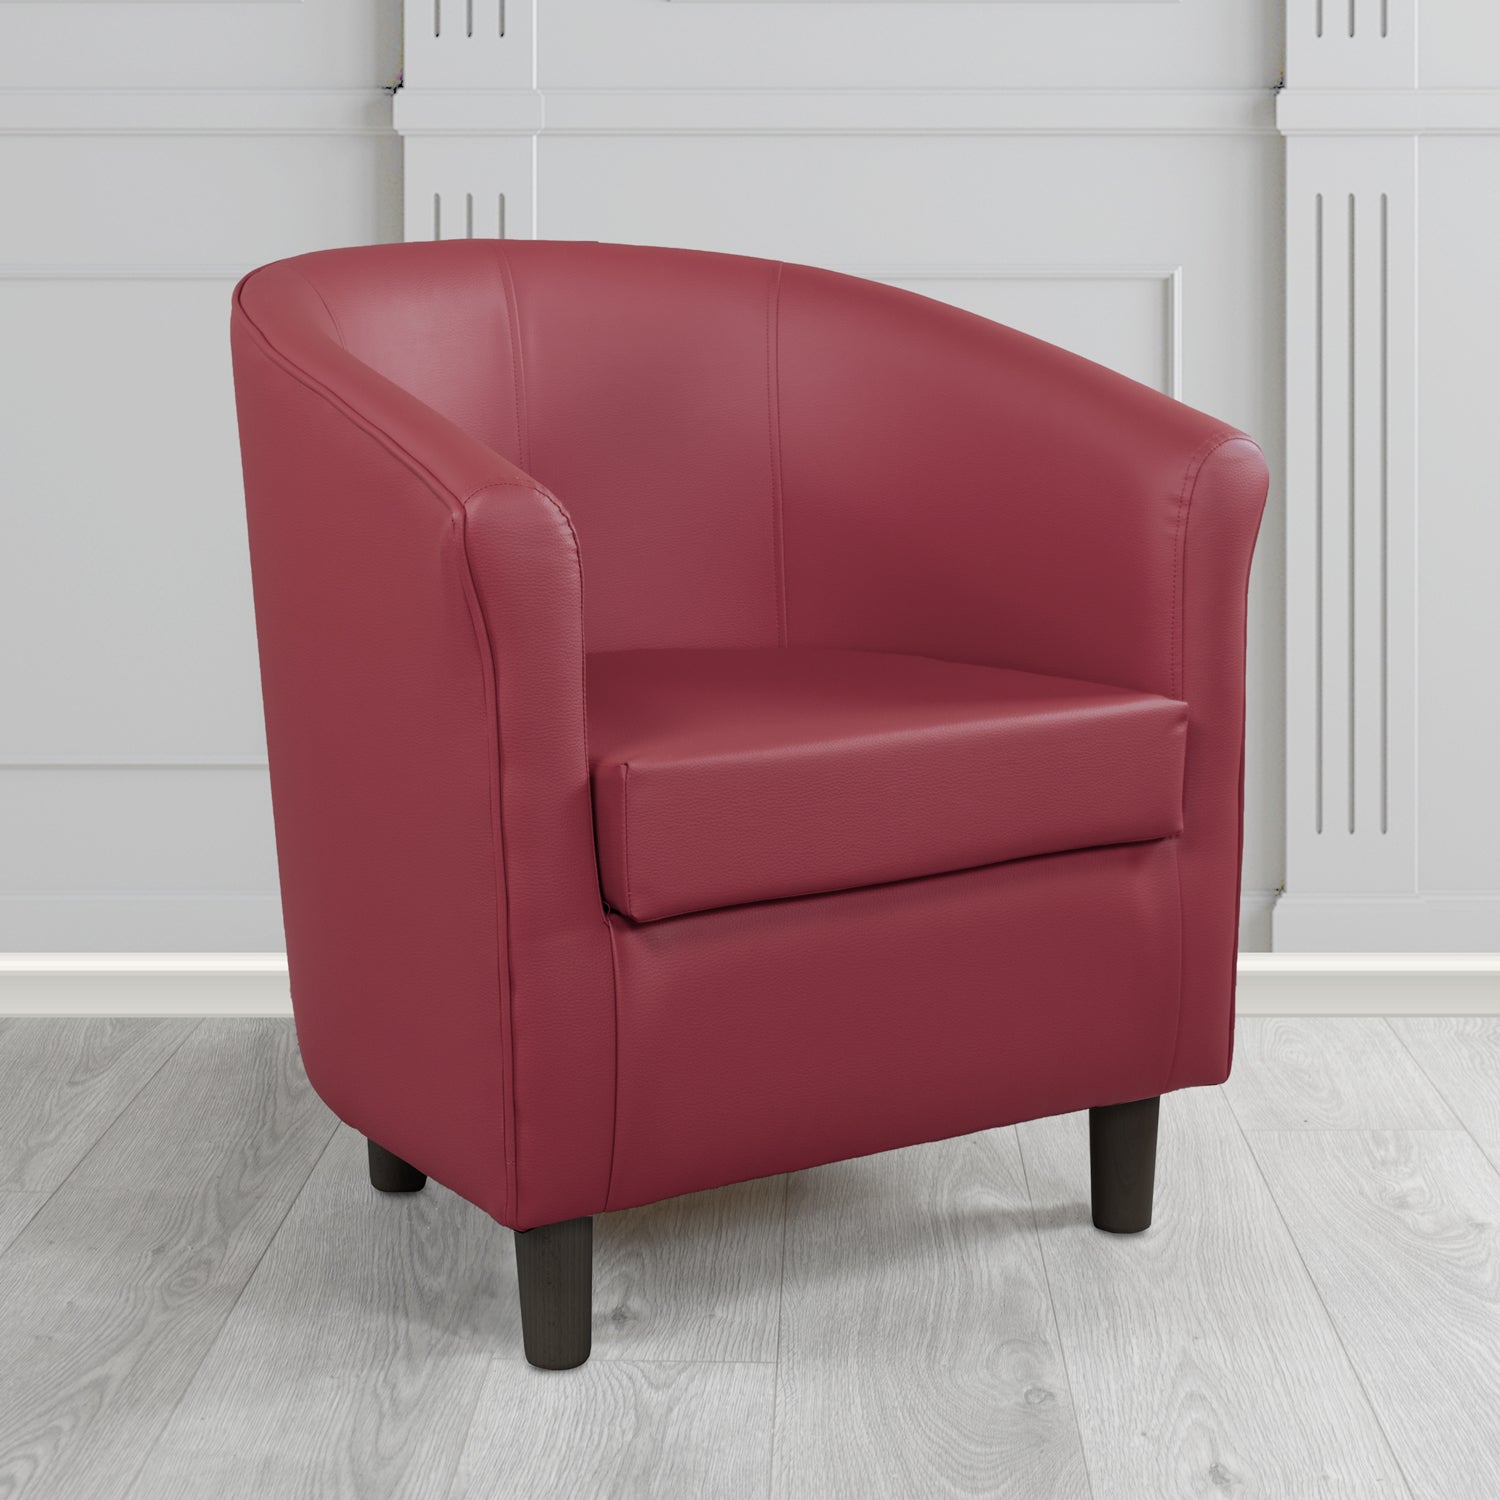 Tuscany Just Colour Jazzberry Antimicrobial Crib 5 Contract Faux Leather Tub Chair - The Tub Chair Shop